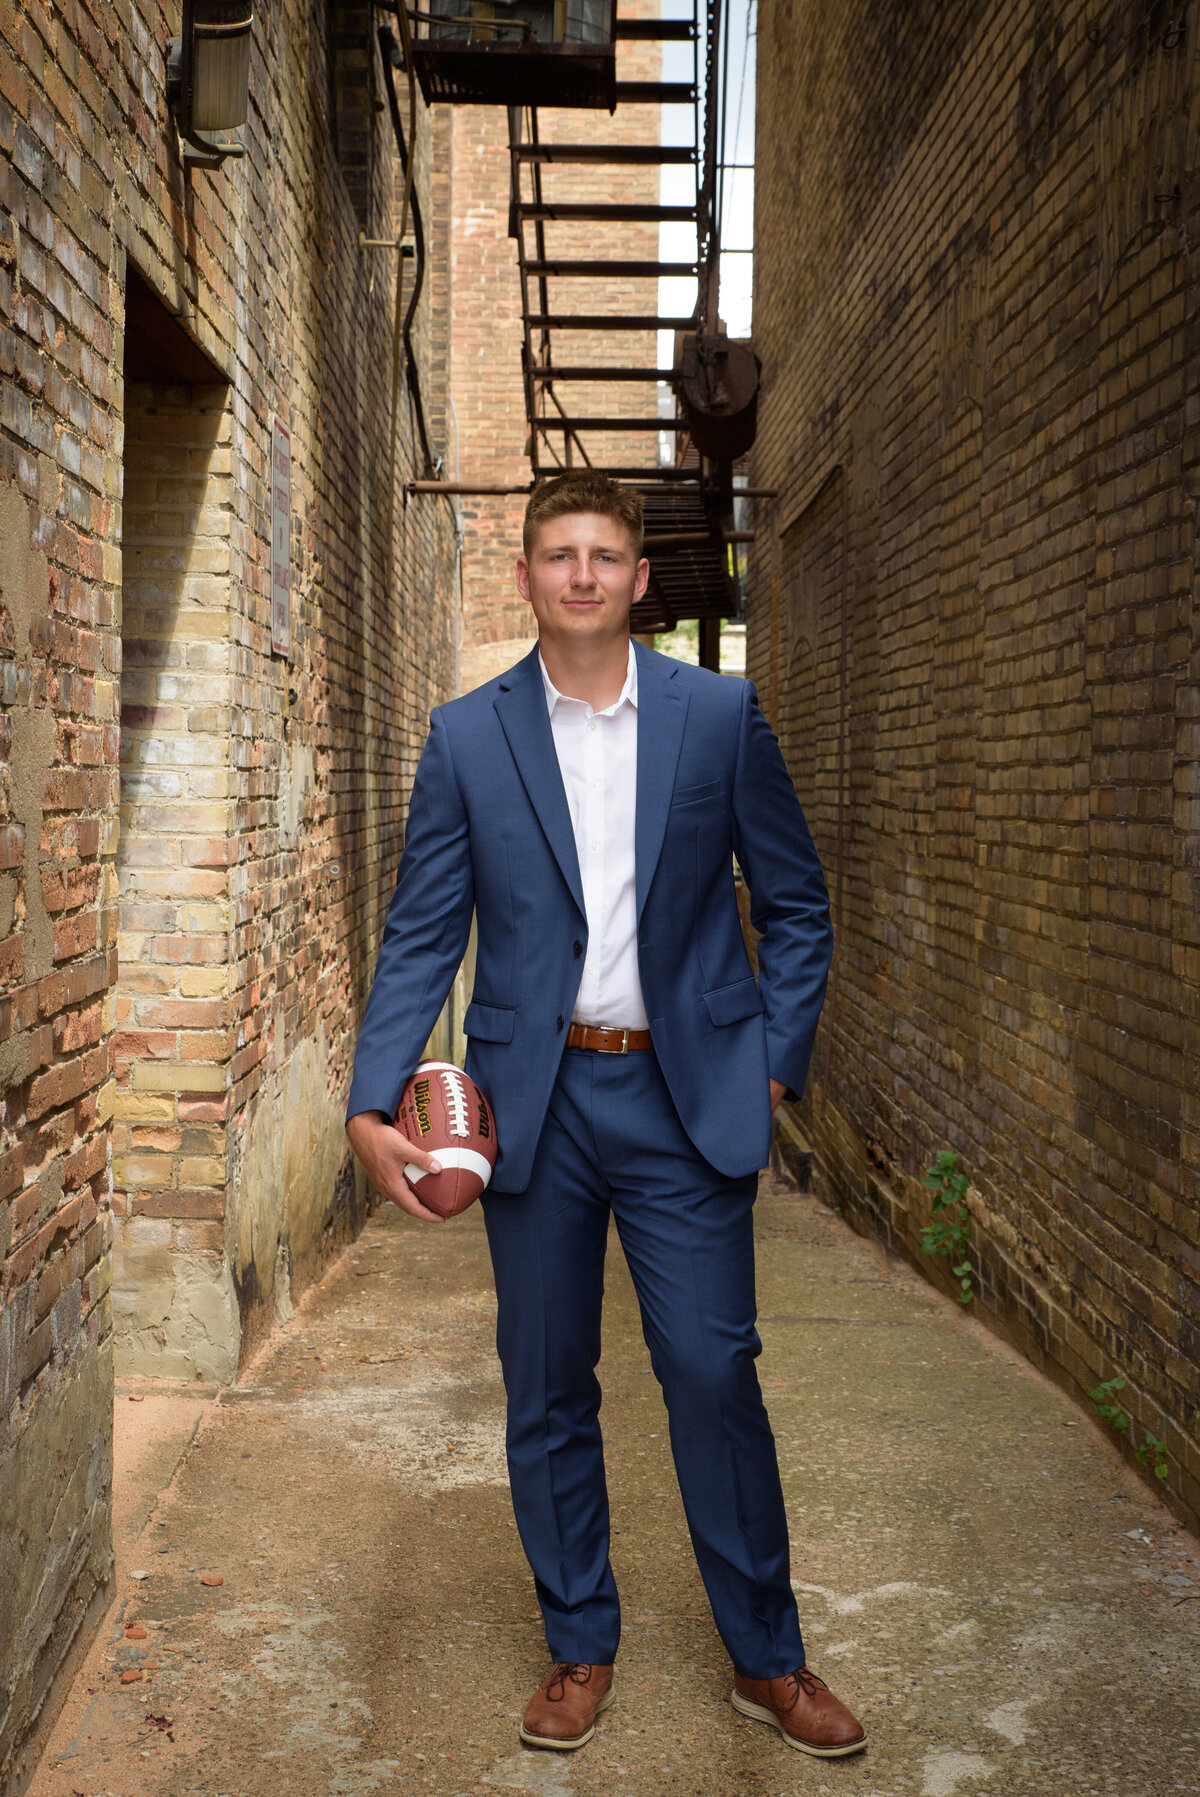 De Pere High School senior boy wearing a blue suit with white shirt holding a football in a brick alley in an urban setting in Downtown Green Bay, Wisconsin